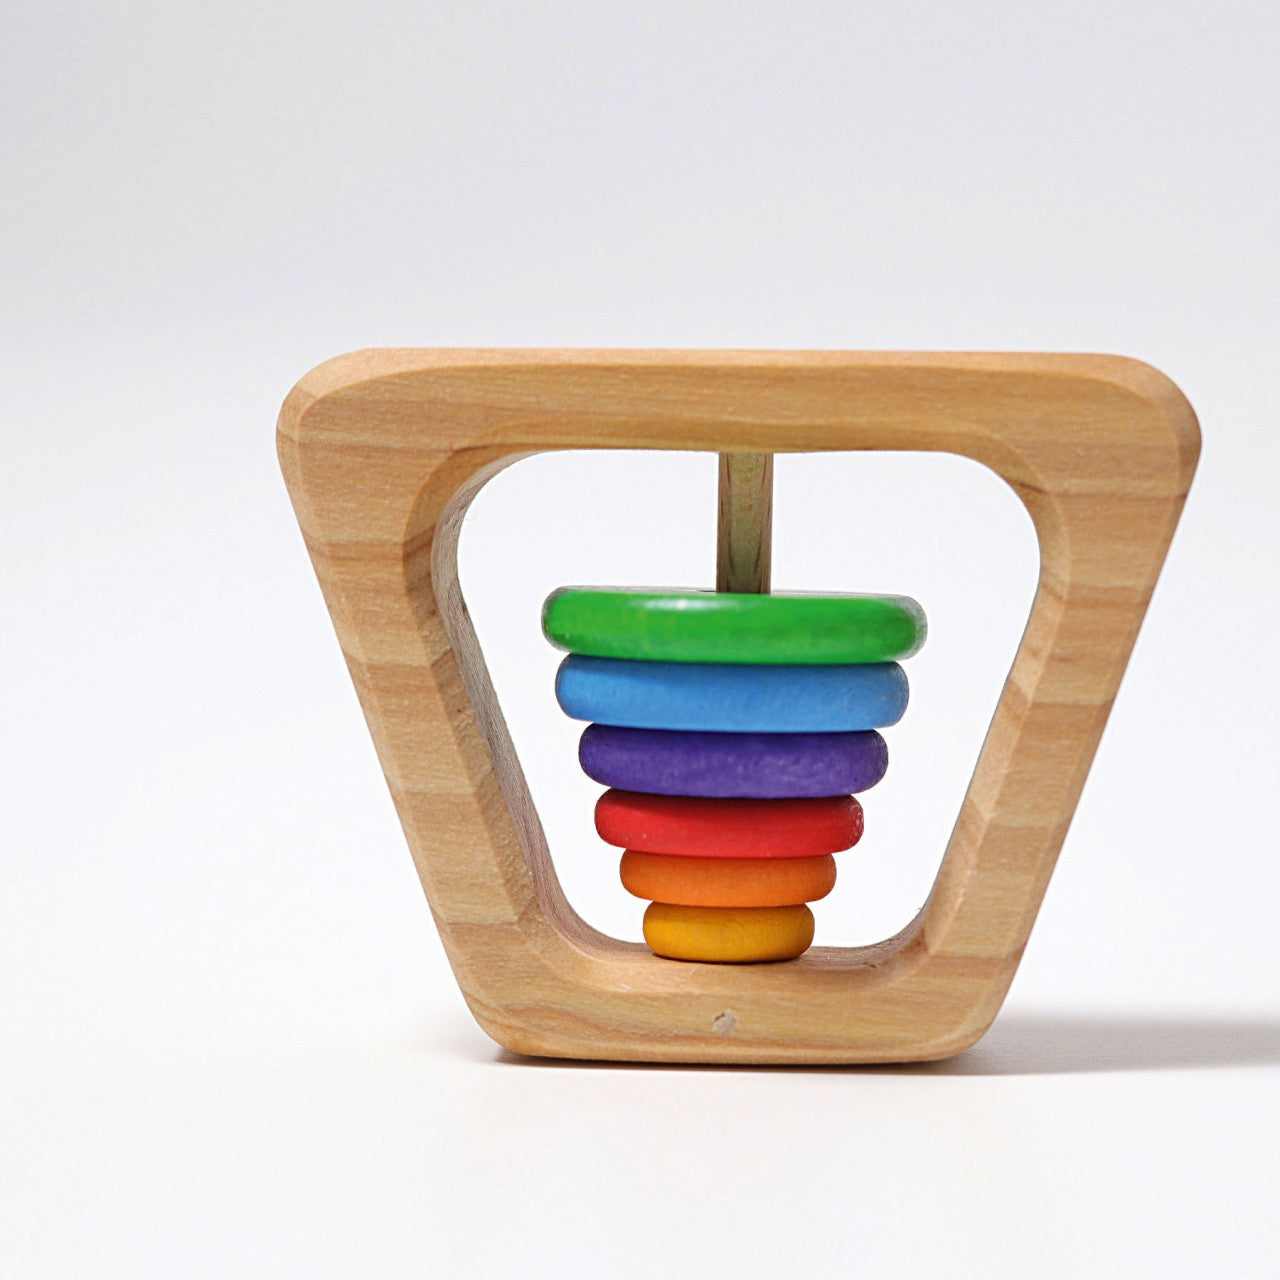 Wooden Grimm's Pyramid Rattle